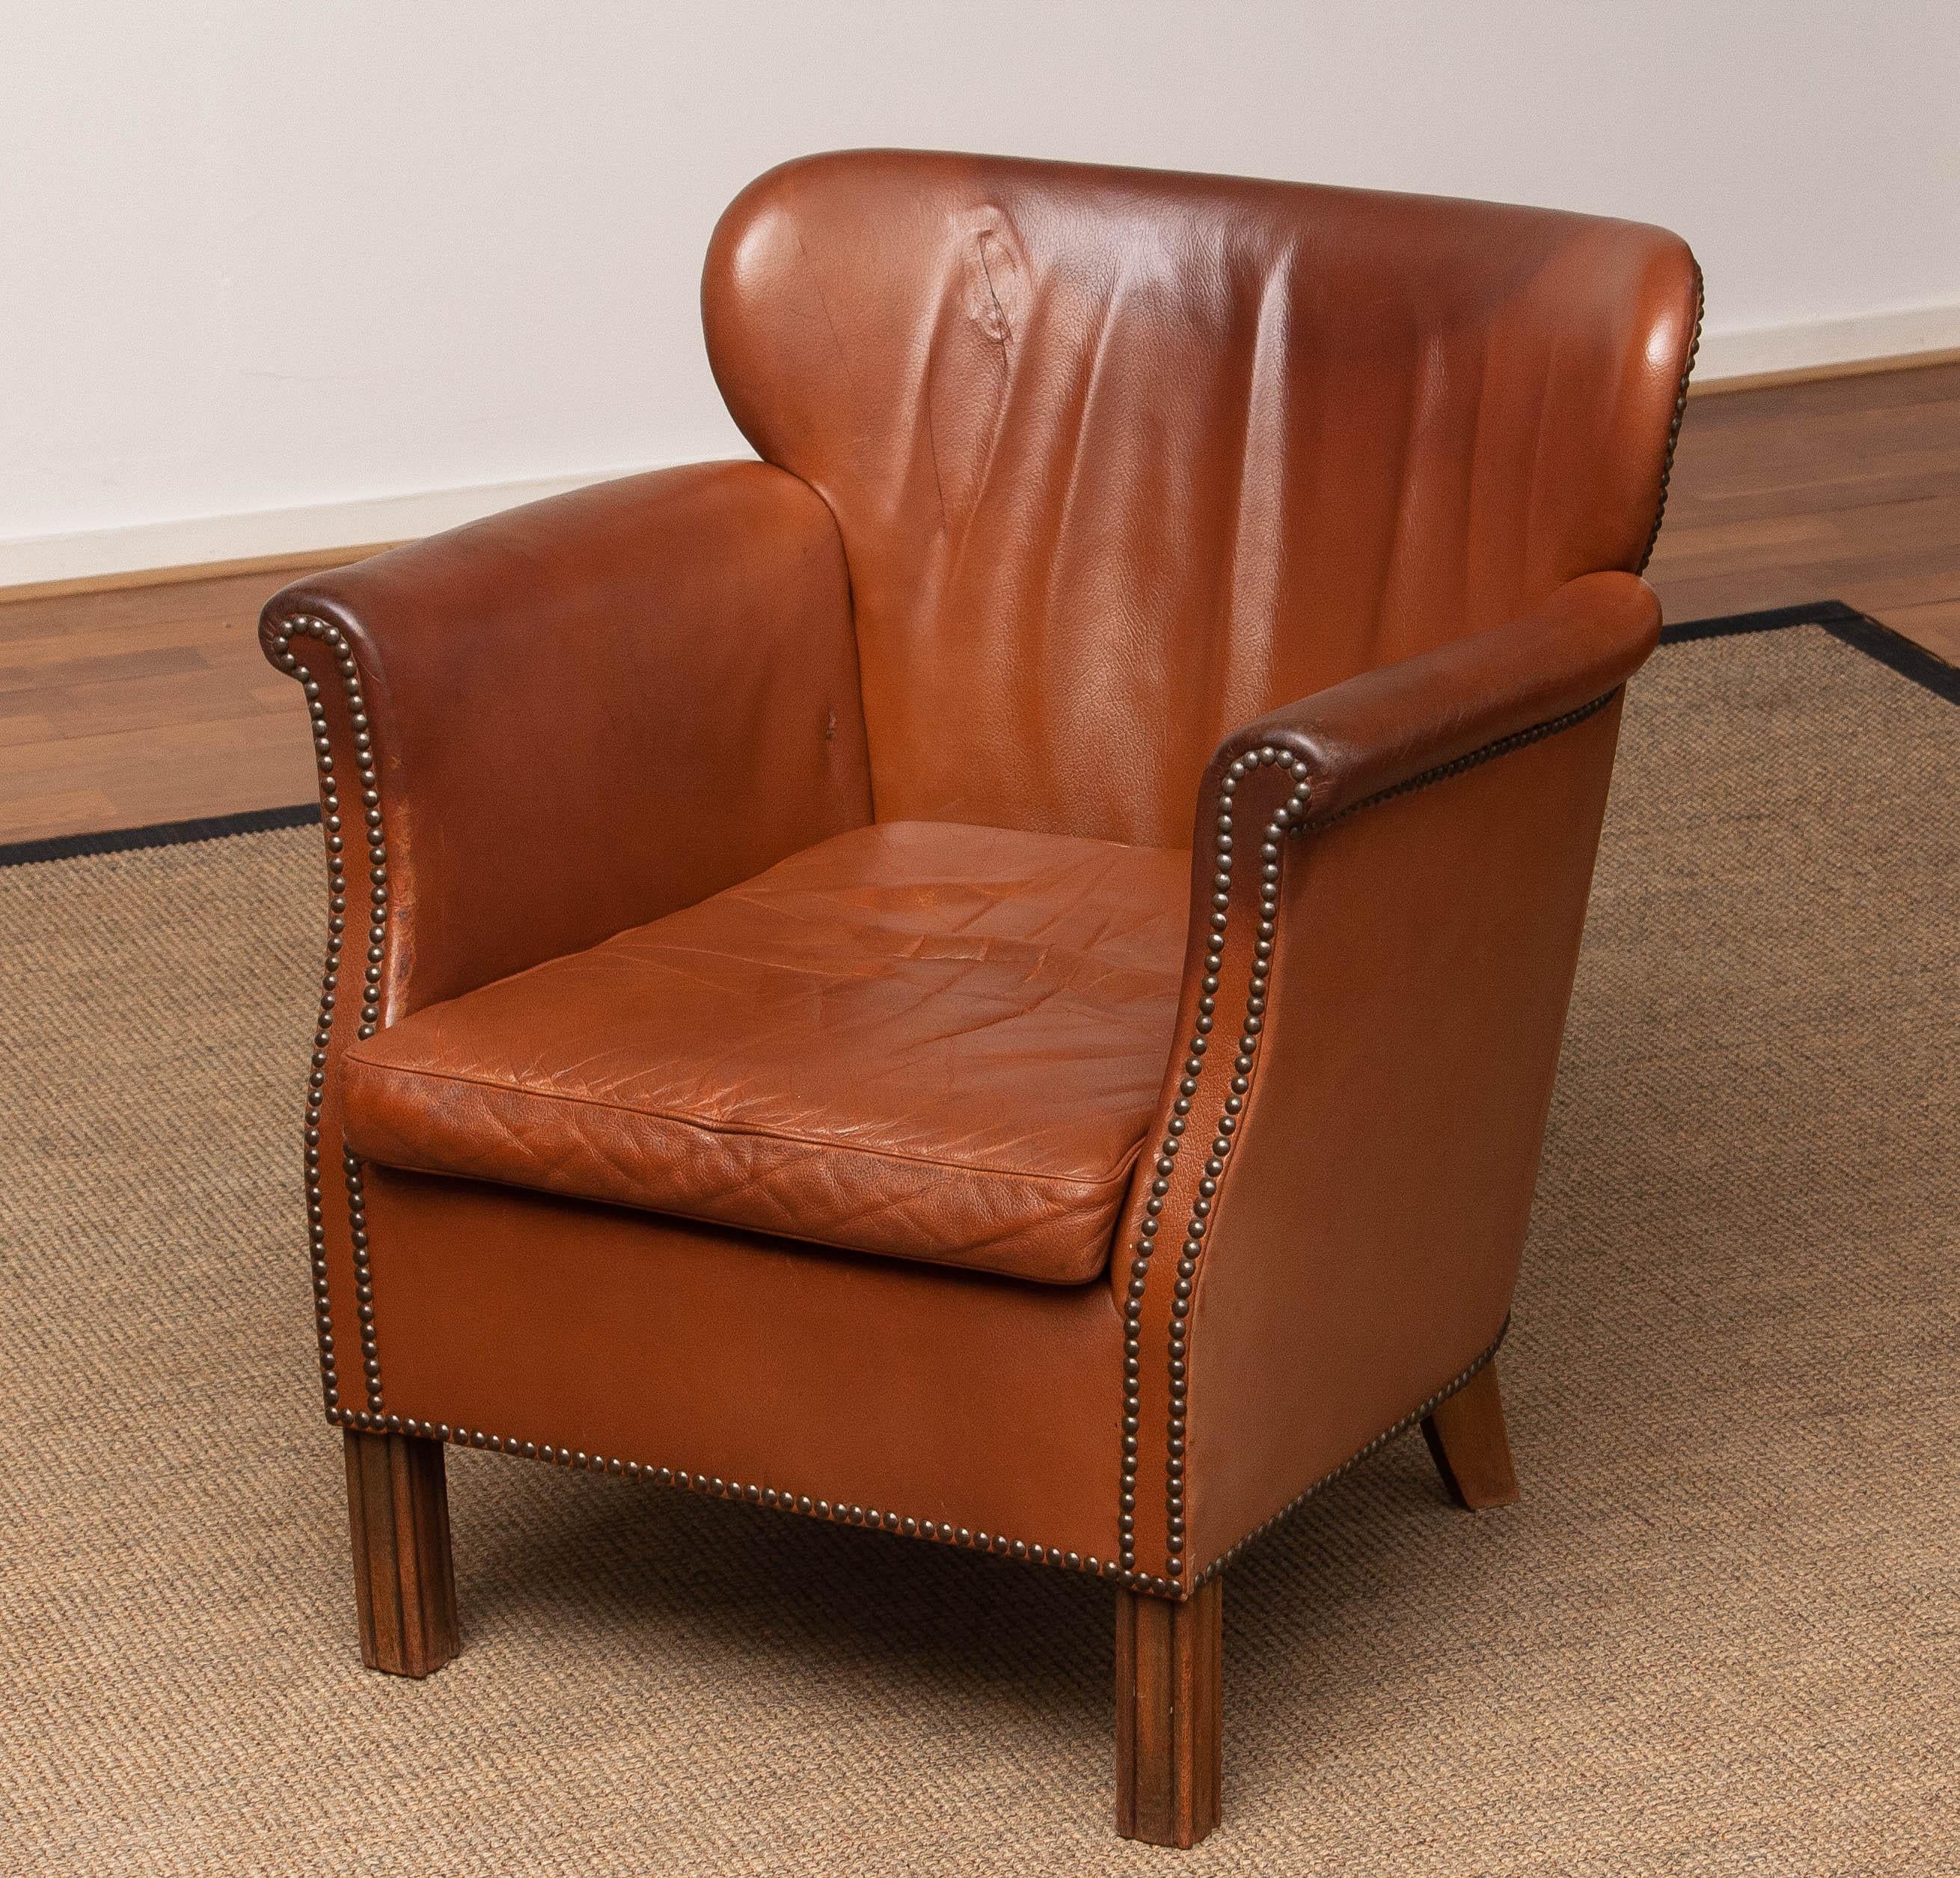 1940's Scandinavian Tan / Brown Nailed Leather Club / Cigar Chair from Denmark 1